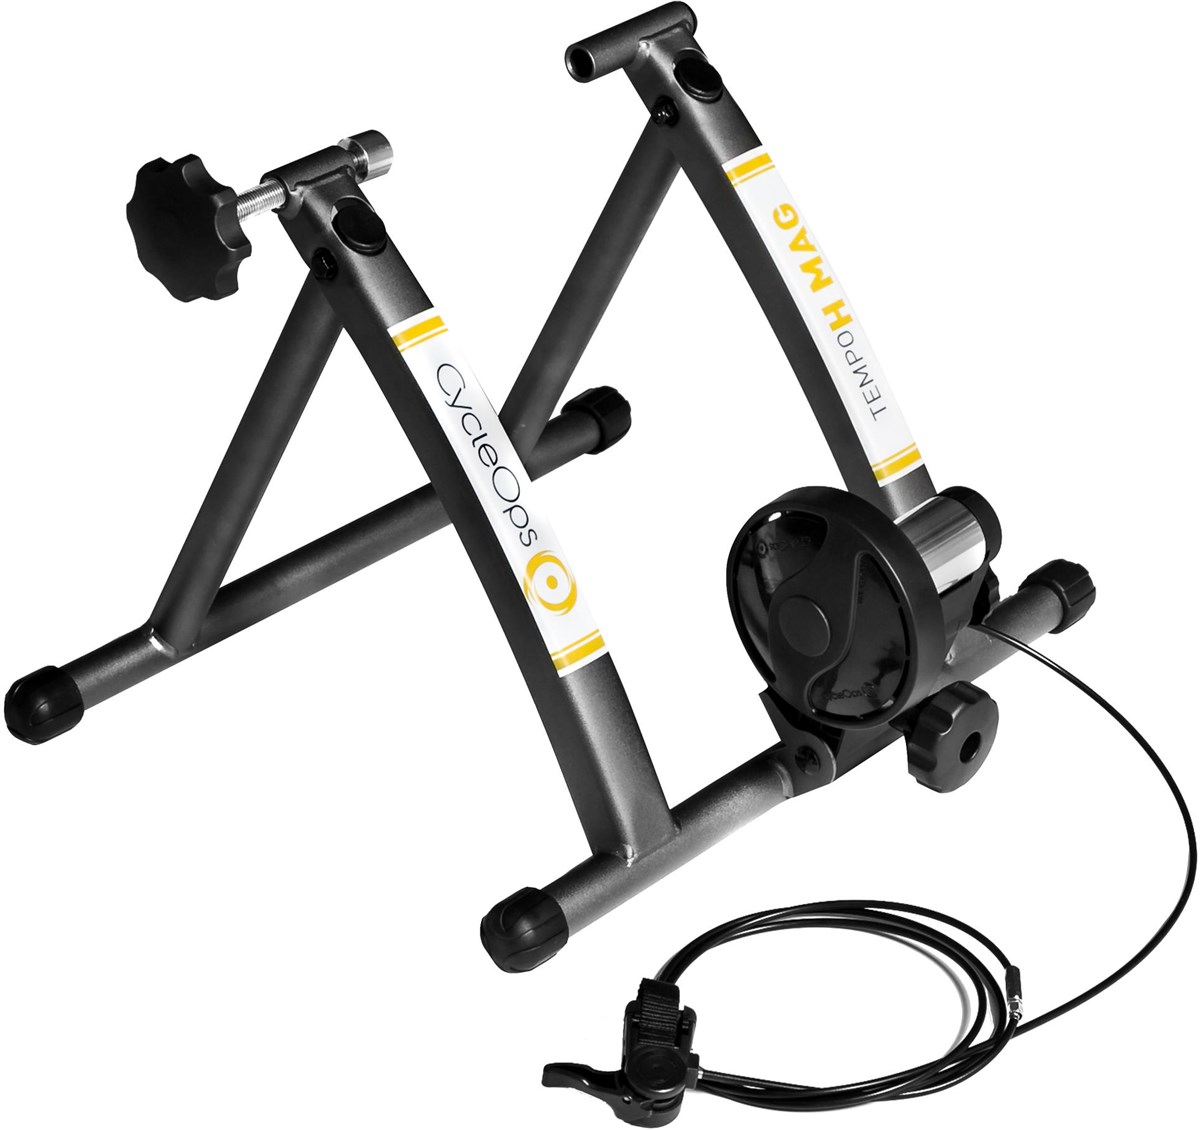 CycleOps Tempo H Mag Turbo Trainer